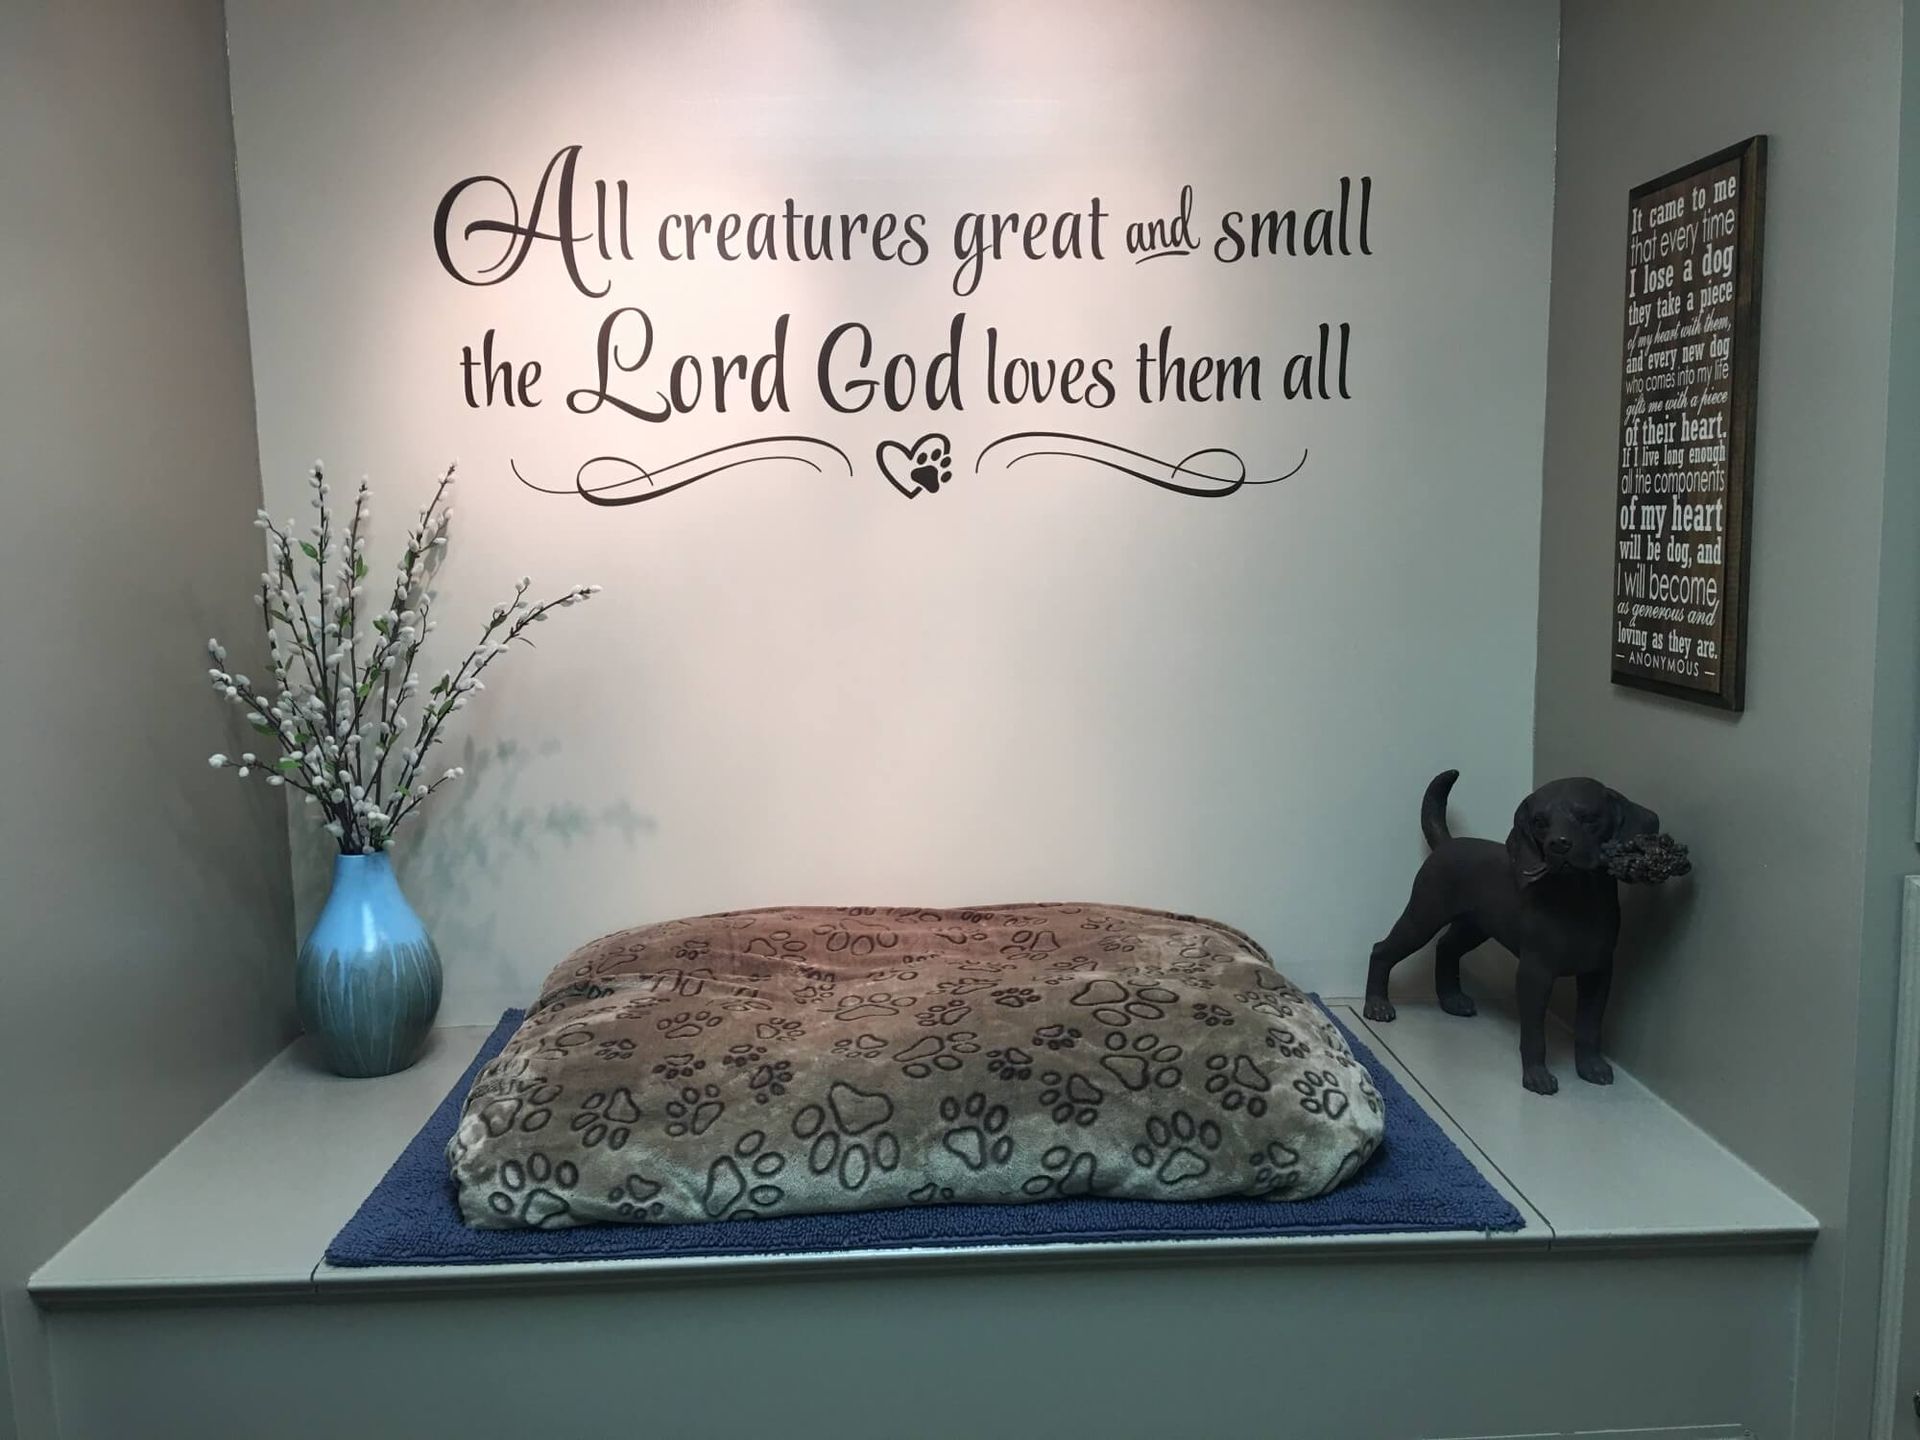 a dog bed under a wall that says all creatures great and small the lord god loves them all